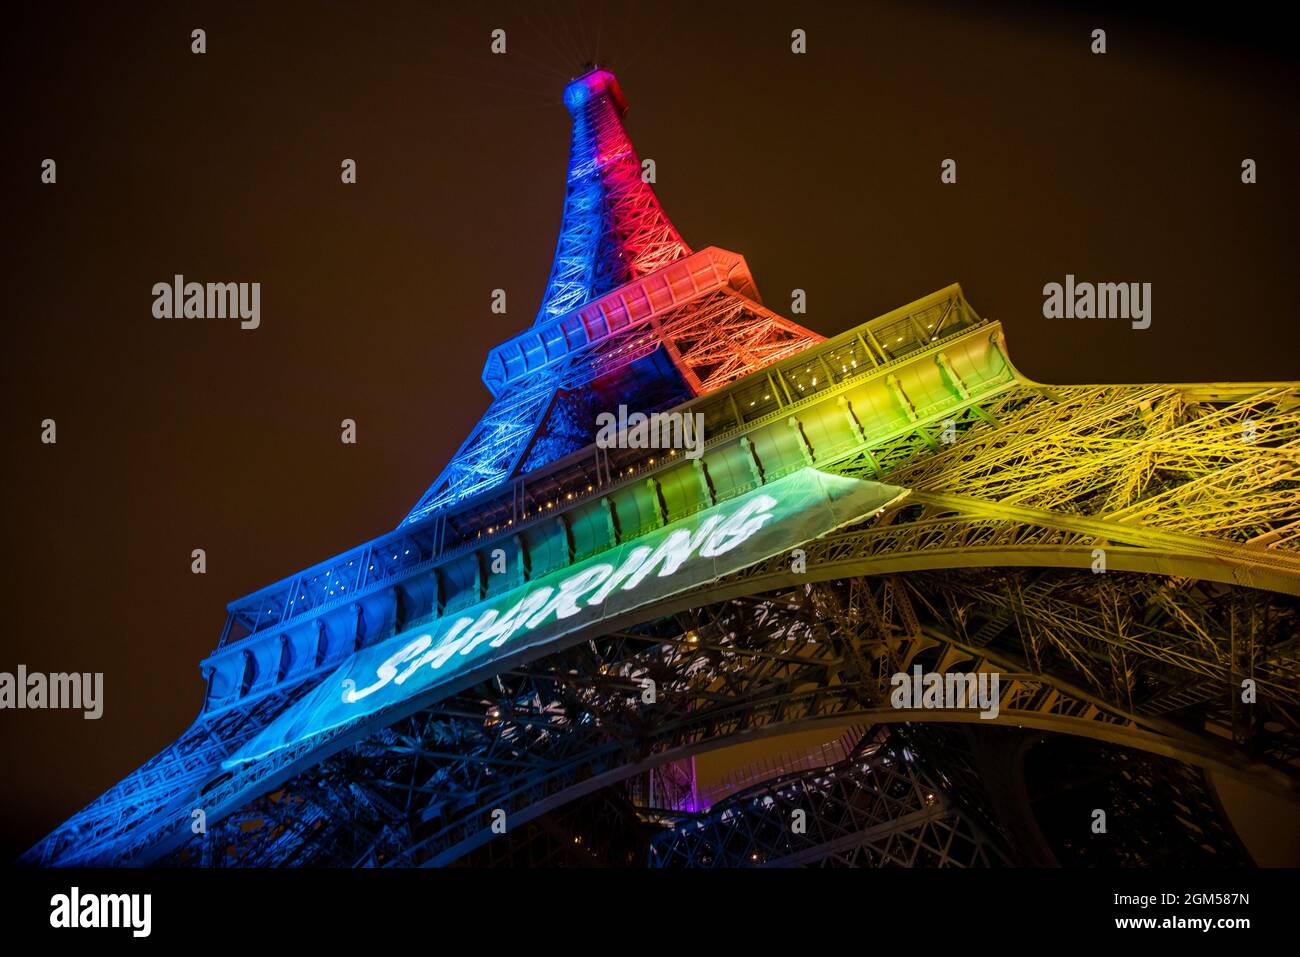 Wide view of the Eiffel Tower lit up in rainbow colors at night and